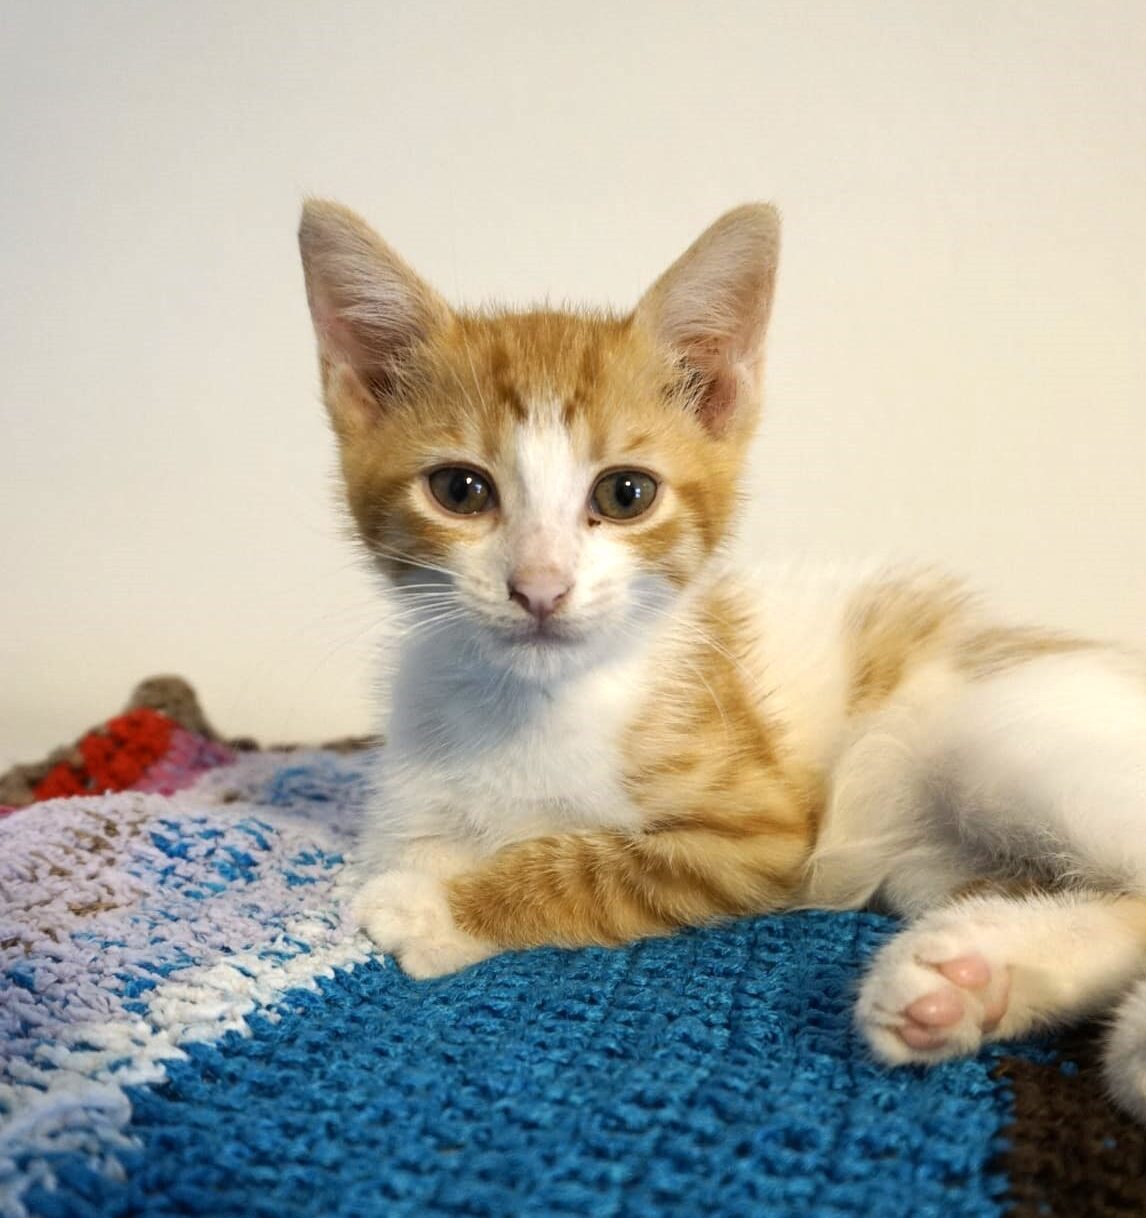 Say hello to Nigel, an 8-week-old kitten with a zest for life that's as big as his appetite for chicken! This little guy is ready to take on the world with his playful antics a